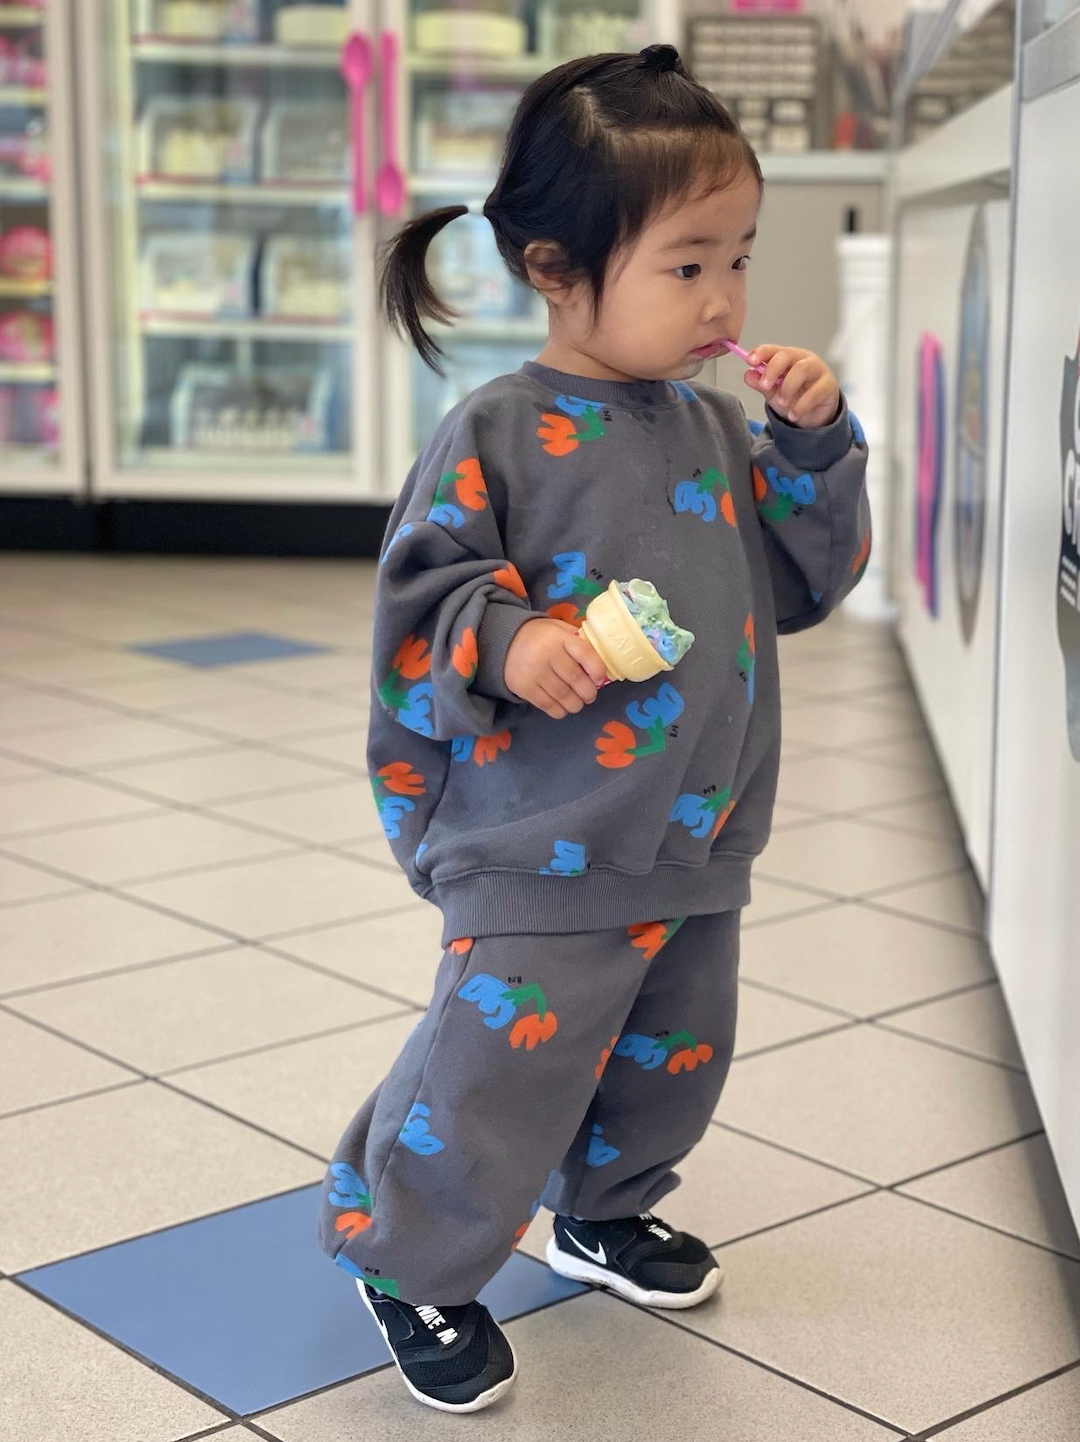 Child eating ice cream in a store, wearing kids' sweatshirt and pants in slate gray, printed with blue and orange flowers